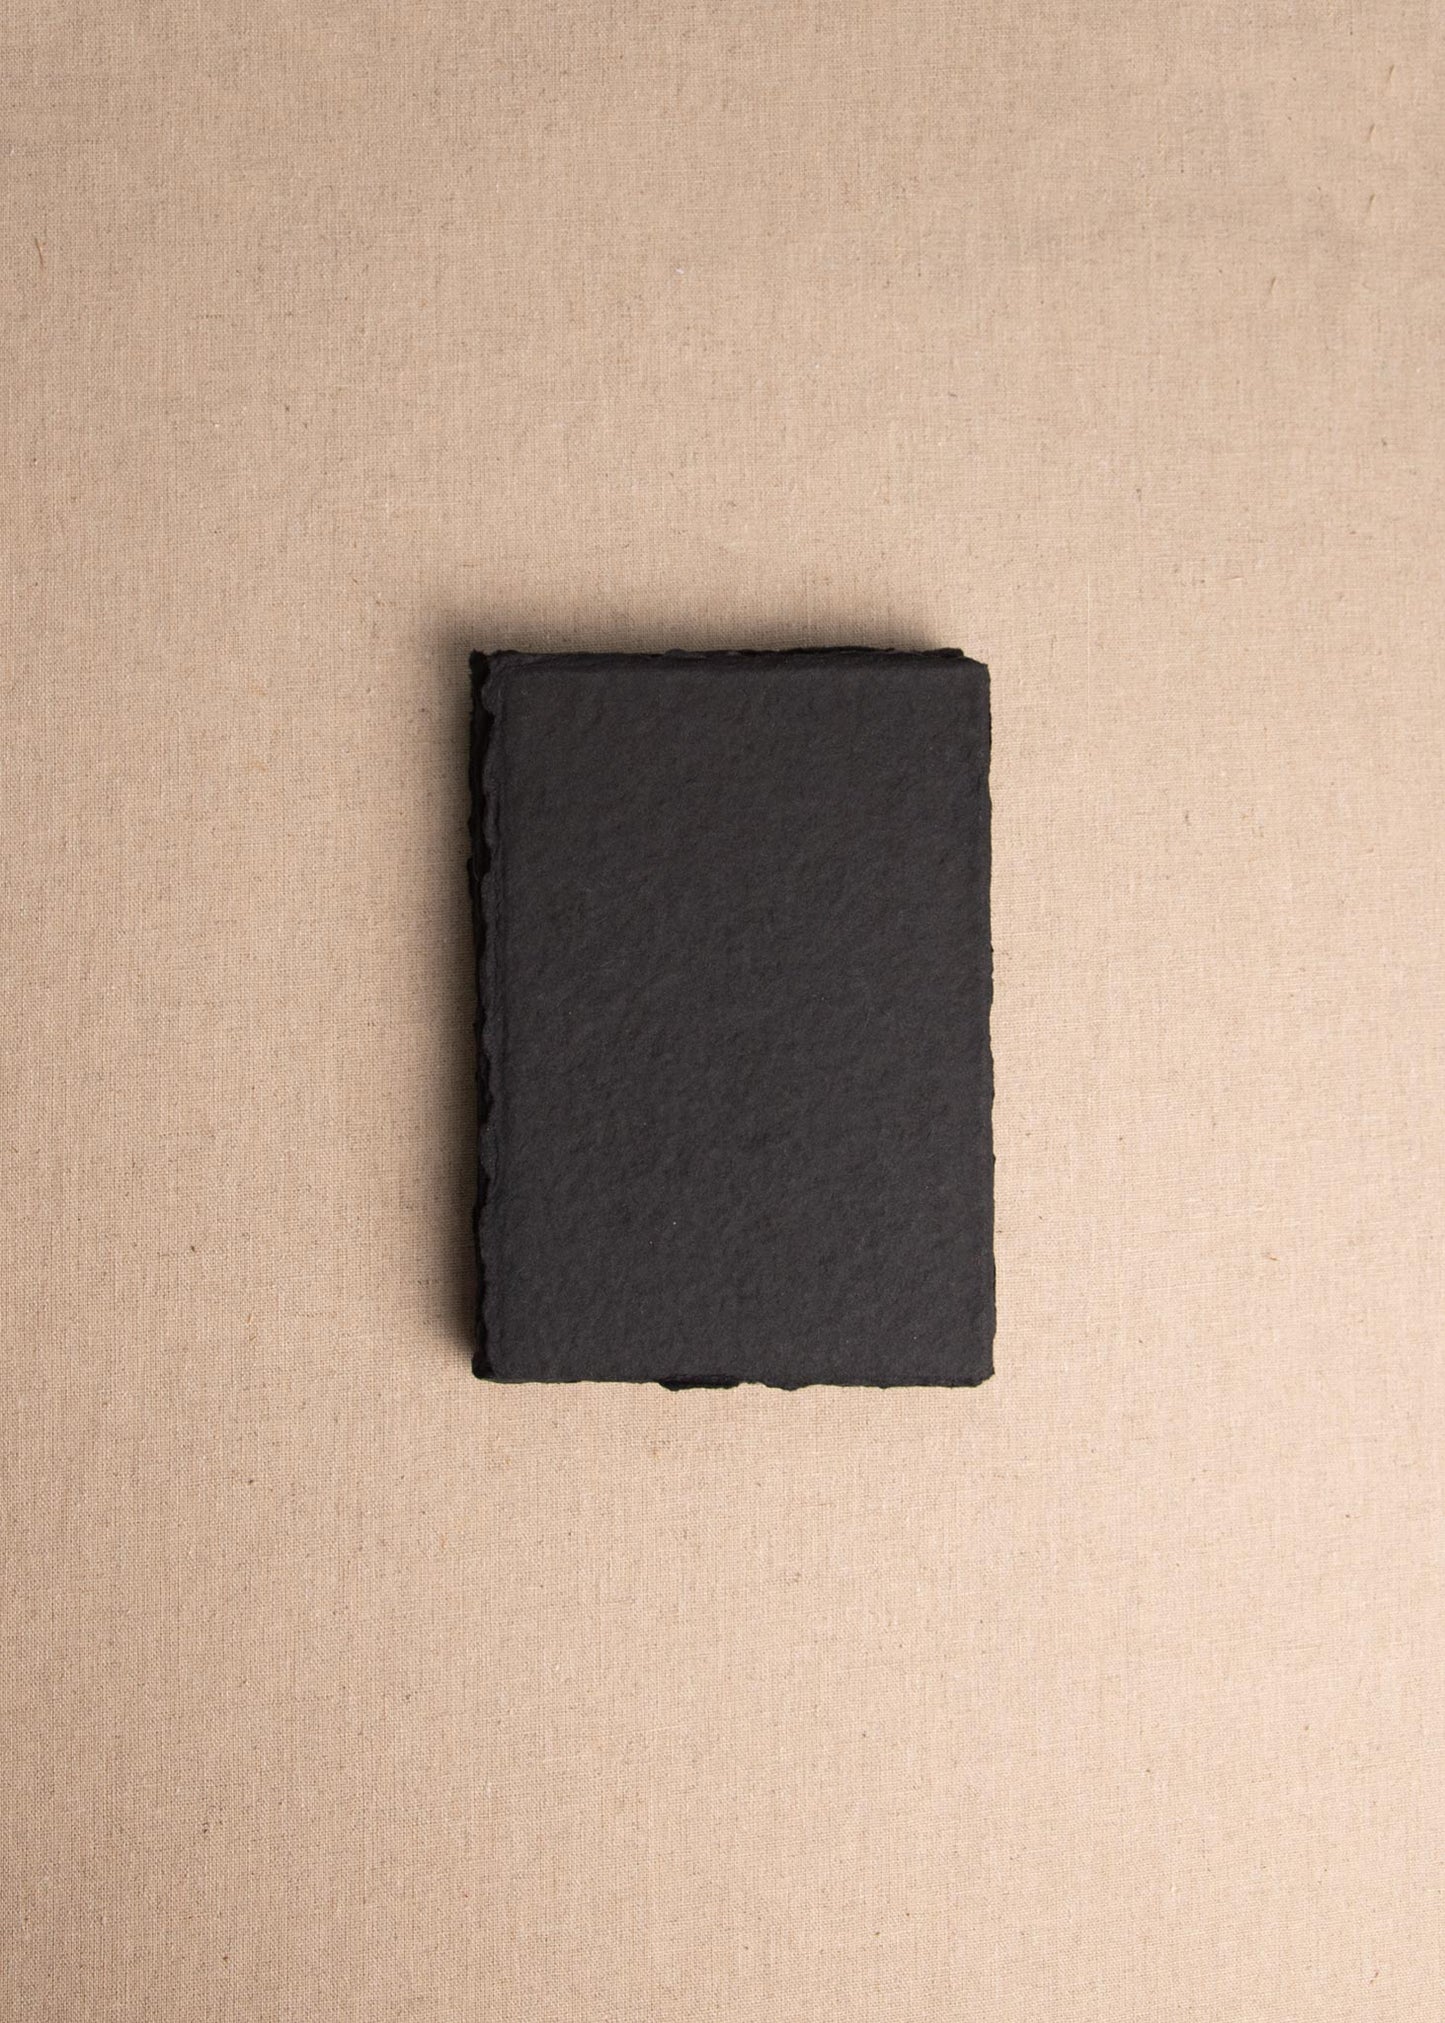 5x7 inch Black Handmade paper with deckle edge